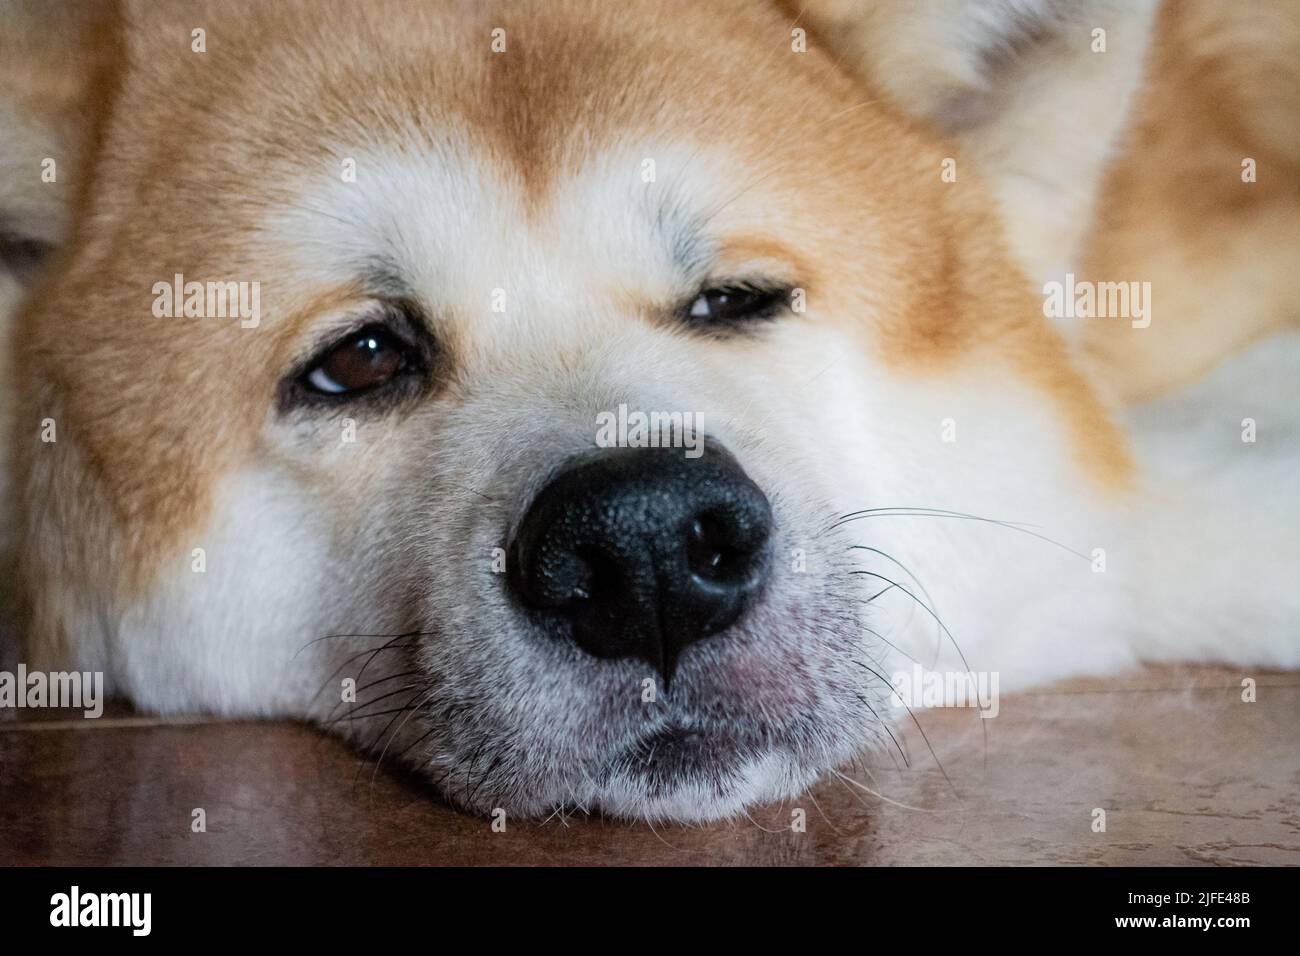 Close-up of the muzzle of a large dog Akita Inu. The pet lies, looks into distance with brown eyes. Stock Photo